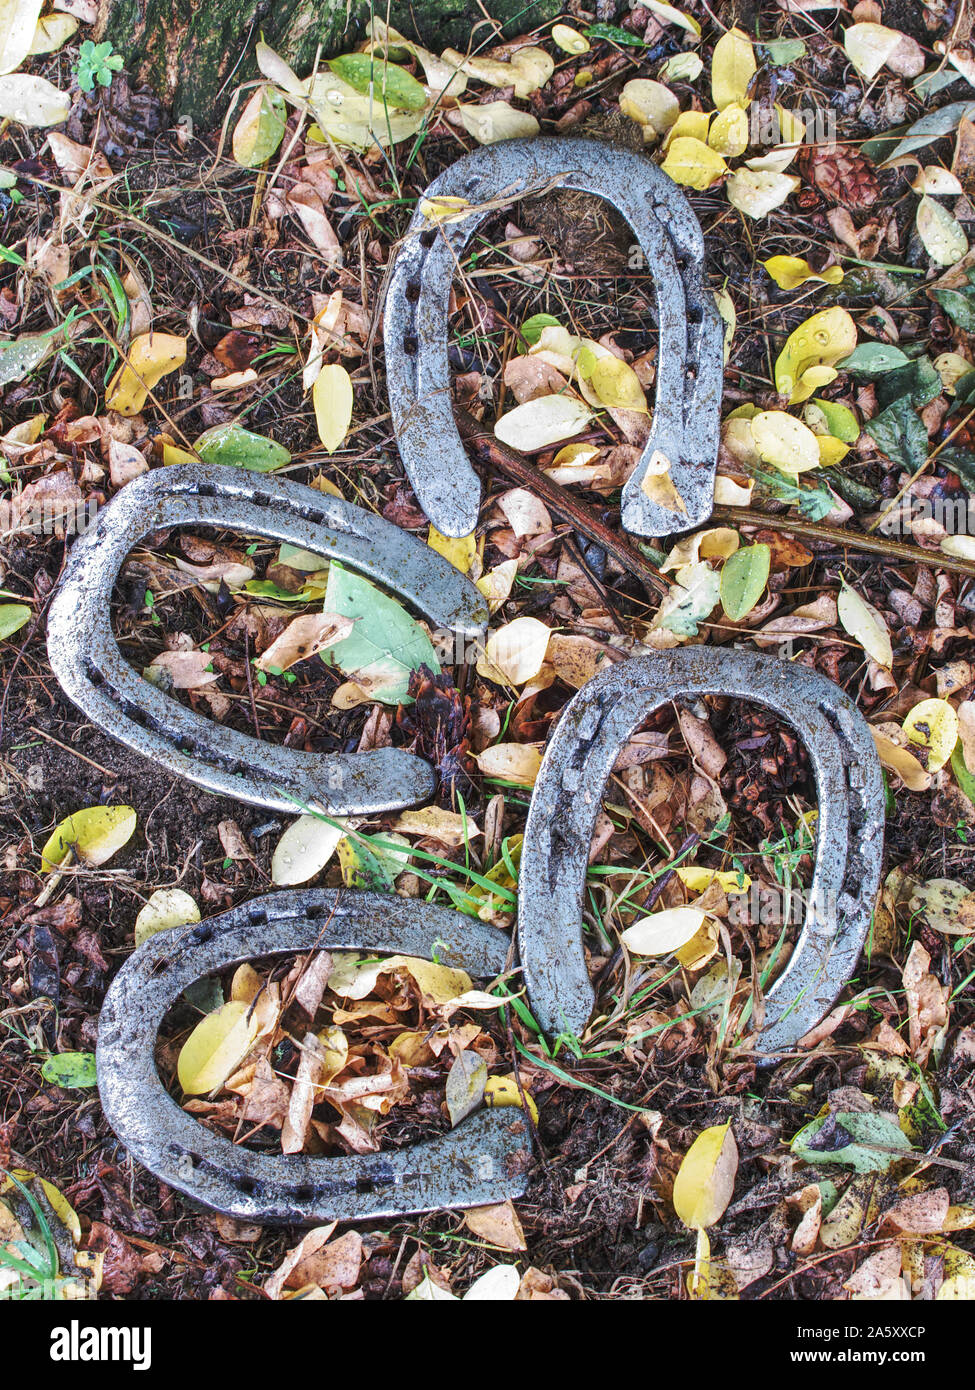 Worn out manual hammered horseshoe after change lying on the grassy ground with colorful autumn leaves around. Autumnal season in horse farm. Stock Photo